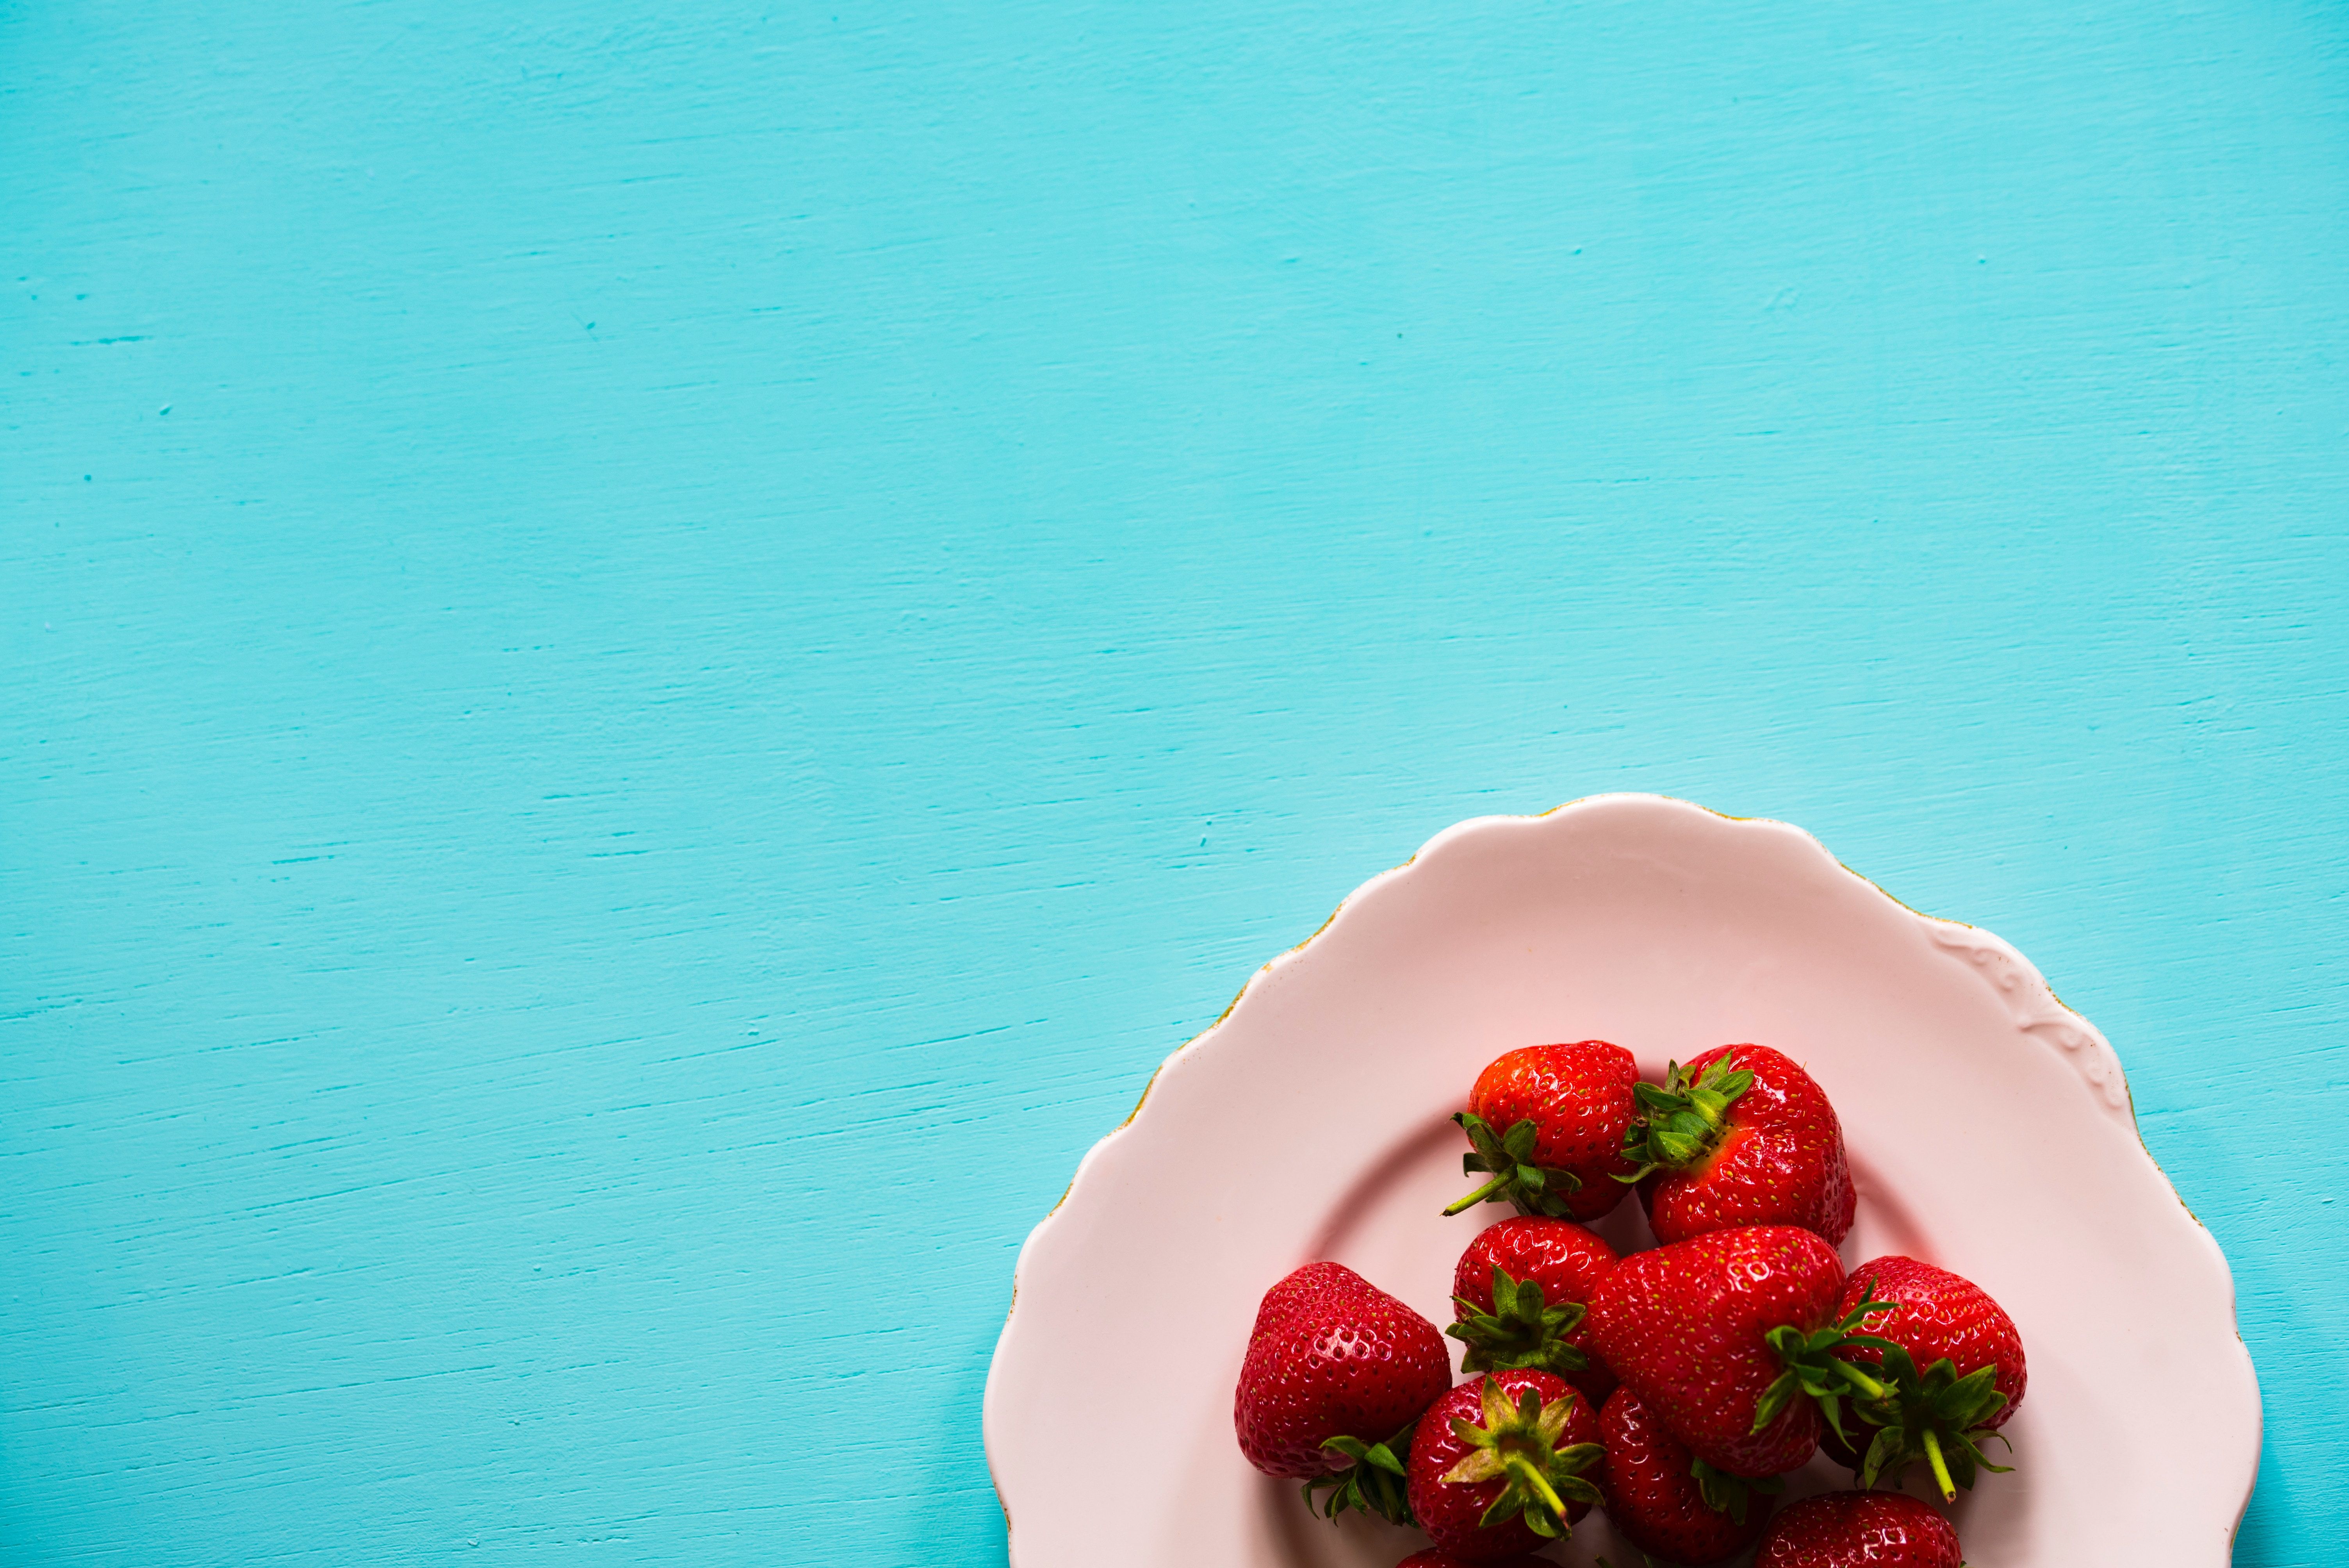 6016x4016 #blue, #sweet, #table top, #fruit, #blue background, #table, #plate, #summer, #pink, #wood, #background, #wallpaper, #top view, #strawberry, #food, #PNG image, #red, #minimalist. Mocah HD Wallpaper